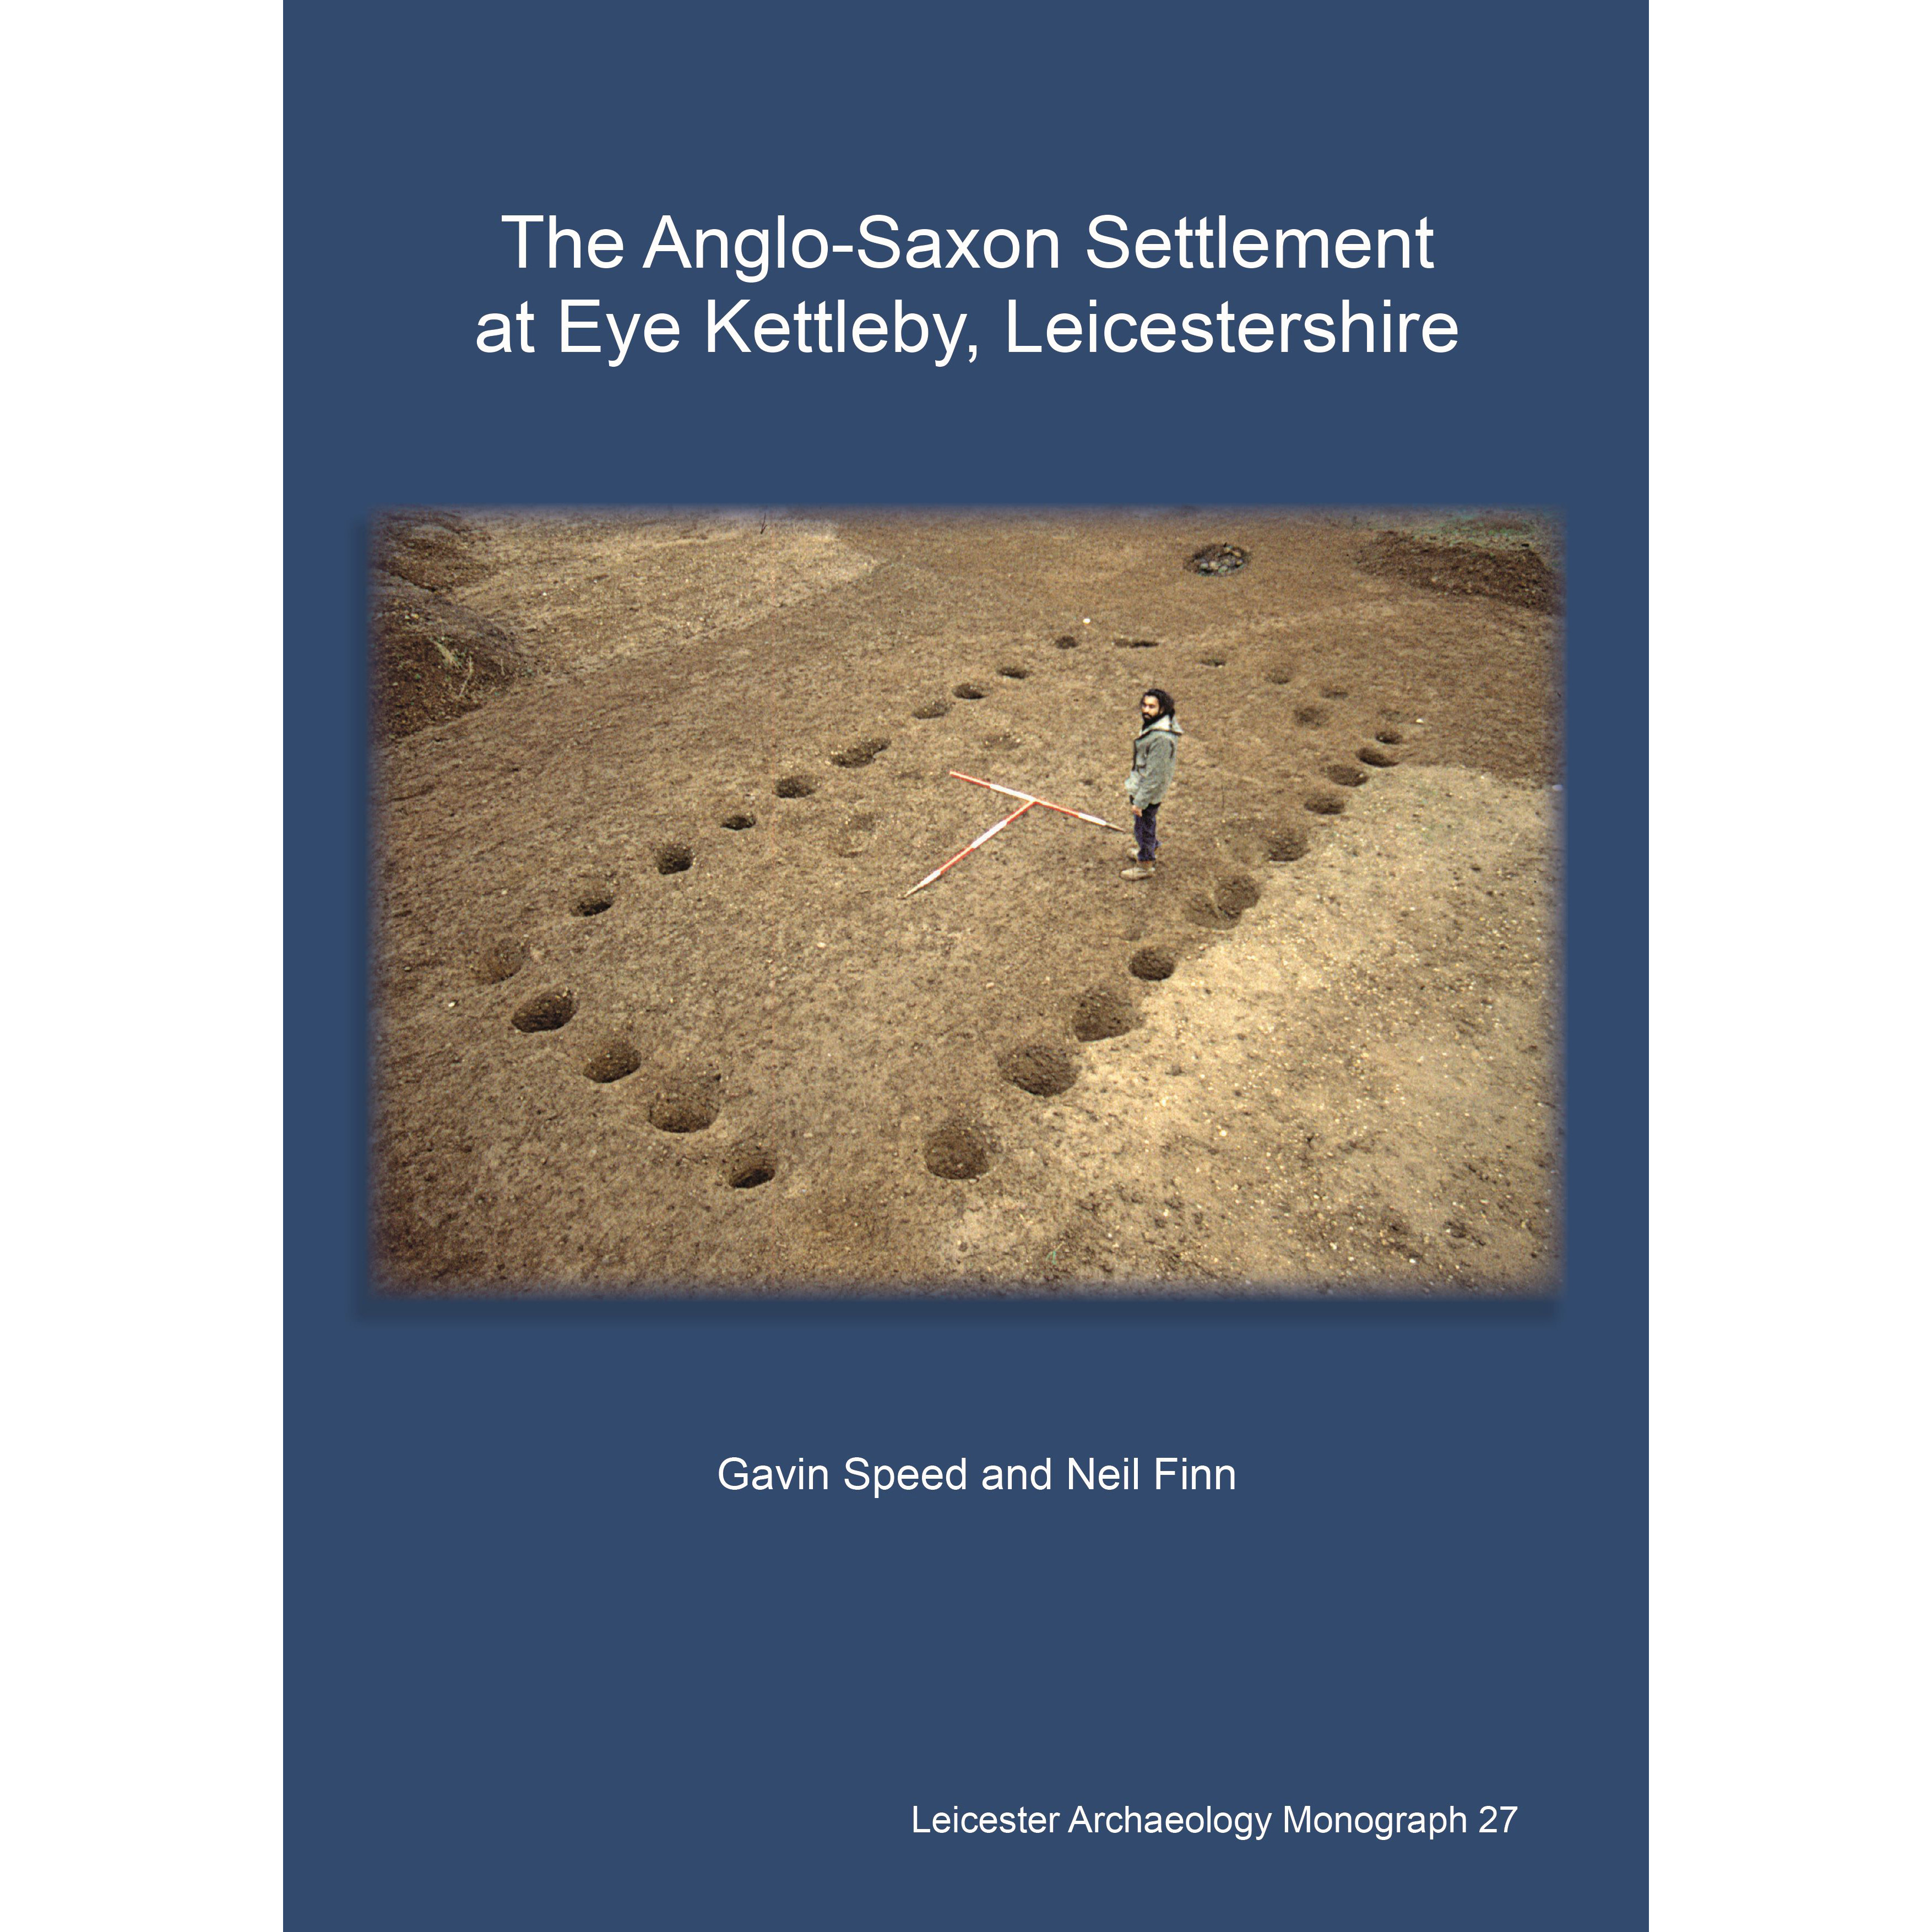 The Anglo-Saxon Settlement at Eye Kettleby, Leicestershire